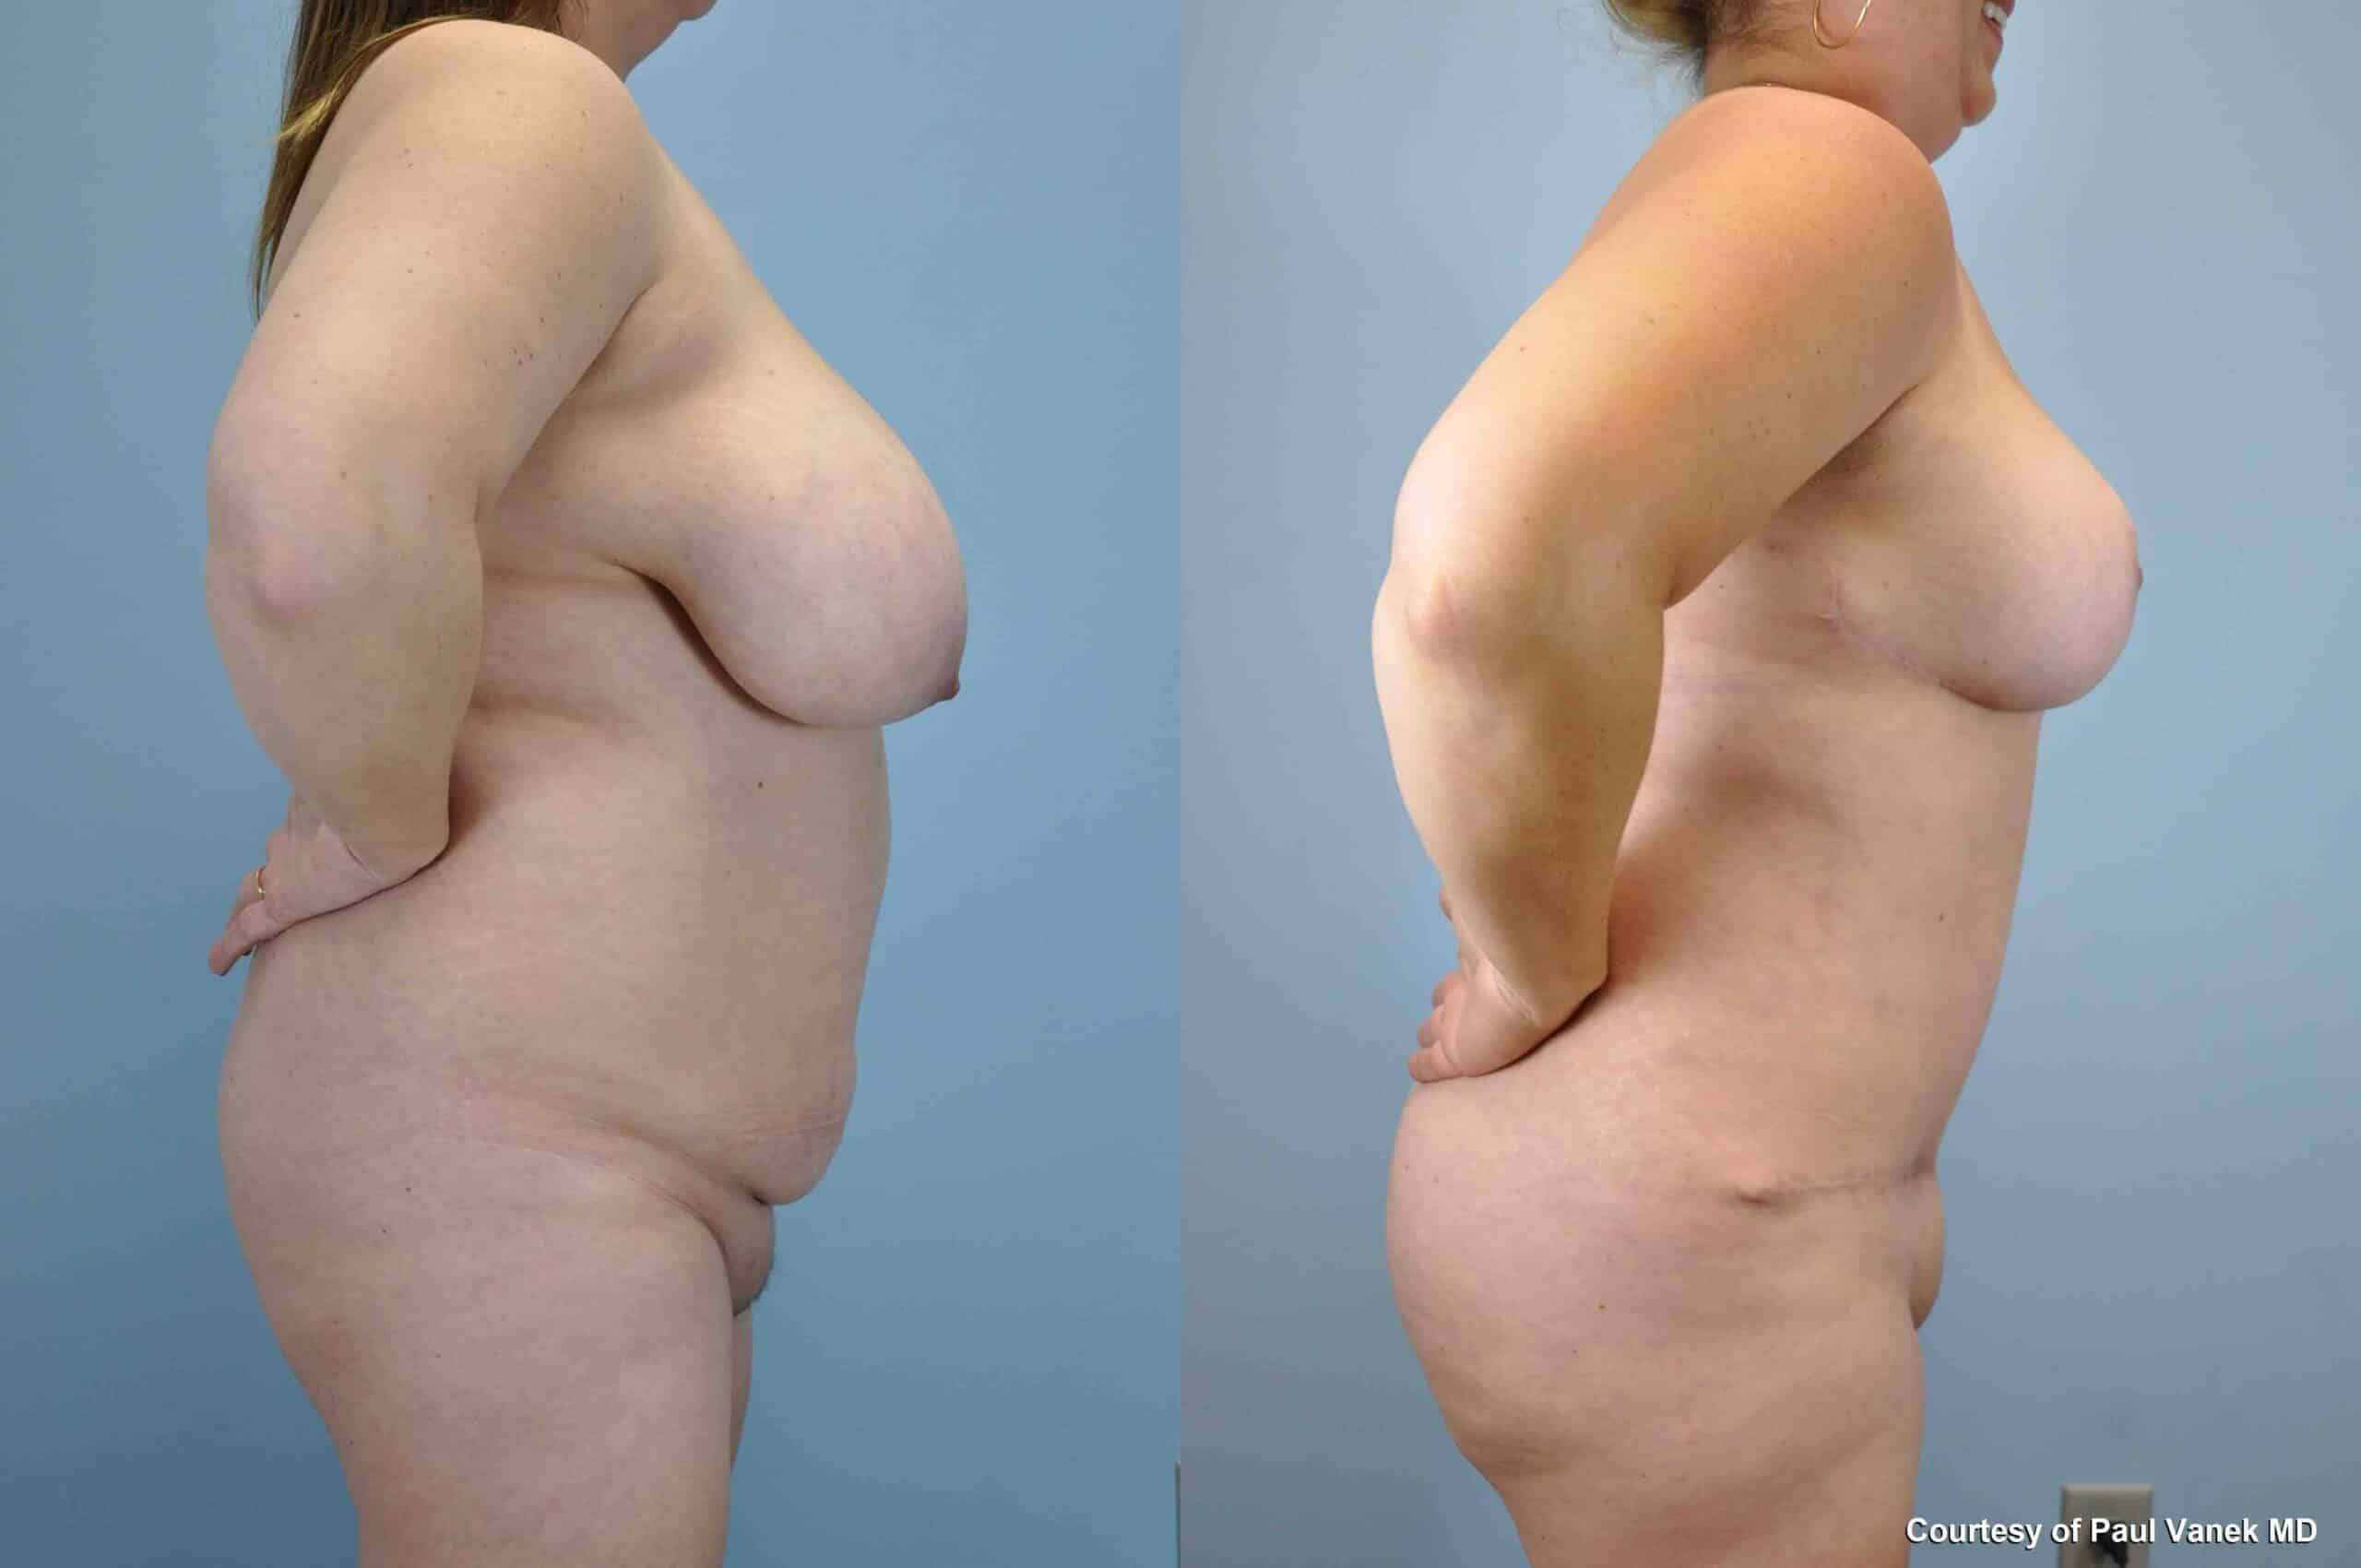 Before and after, patient 7 mo post op from Breast Reduction, Tummy Tuck, VASER Abdomen, Axilla Flanks, Back, Brazilian Butt Lift procedures performed by Dr. Paul Vanek